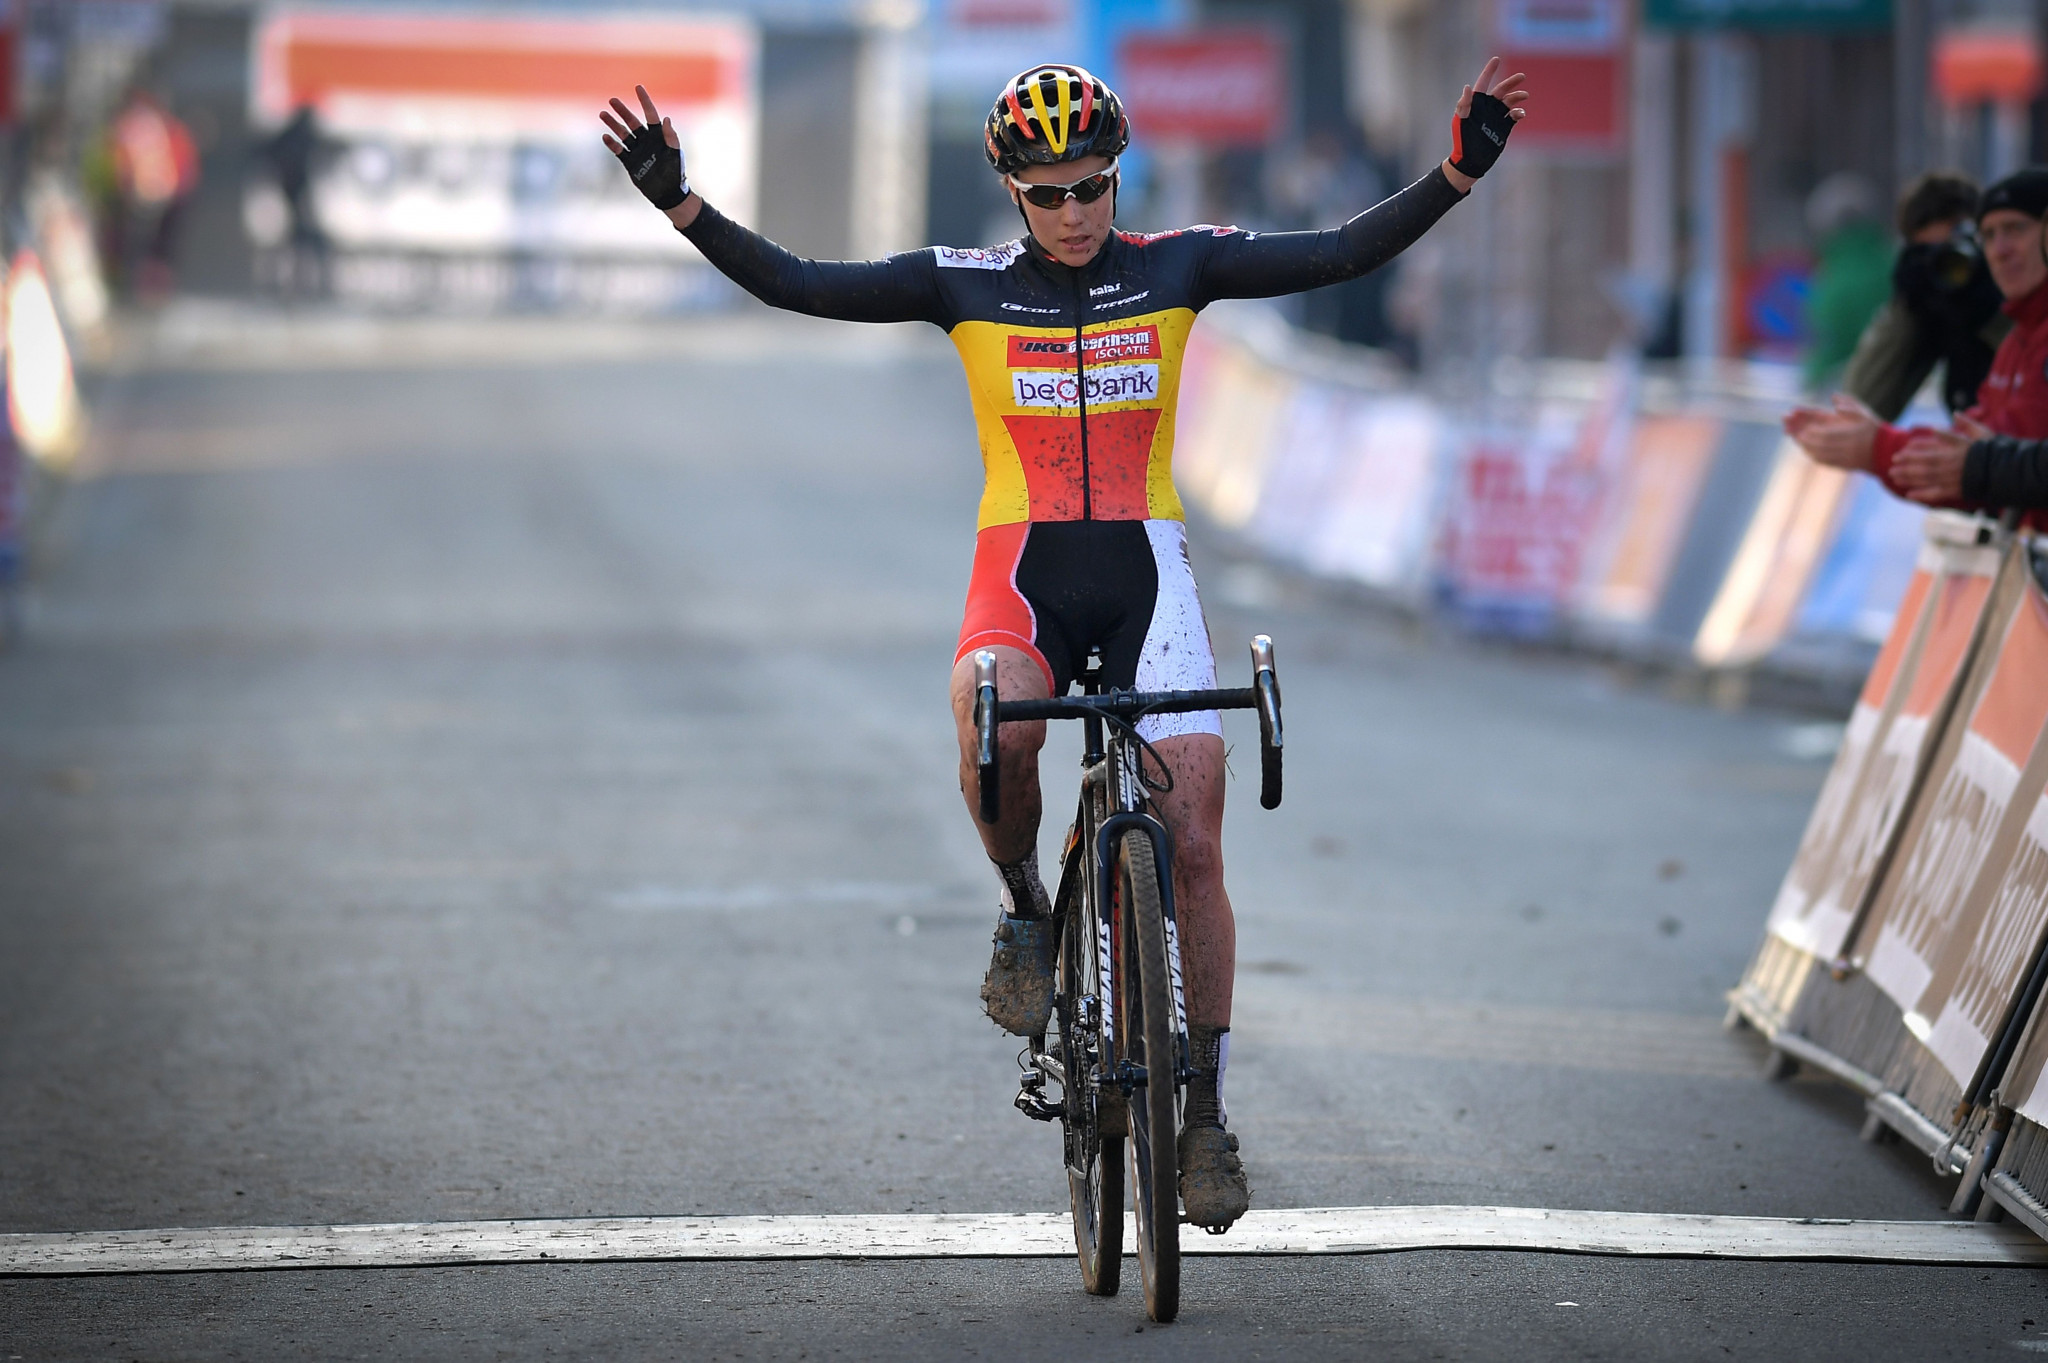 Sanne Cant will target a third win of the season in Zeven ©Getty Images